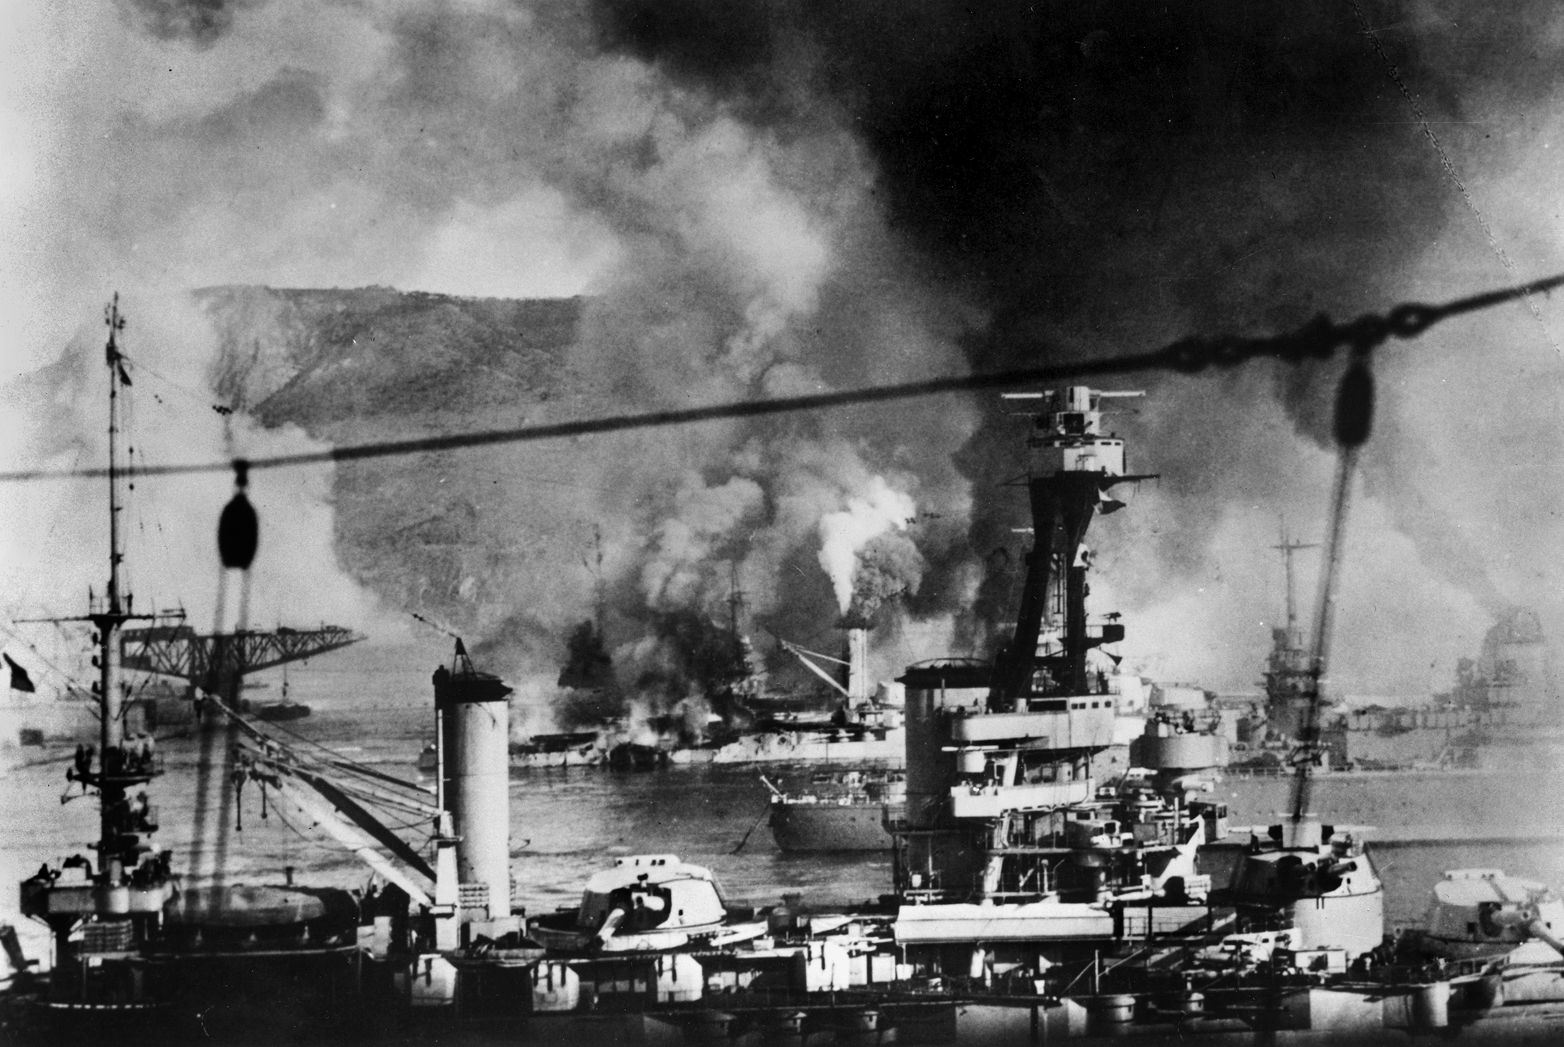 The elderly French battleship Provence is shown under fire in the foreground, while the modern  battleship Strasbourg escapes toward the open sea at right, and another old battleship, Bretagne, burns furiously in the background during the Royal Navy attack on the French fleet at Mers-el-Kebir.